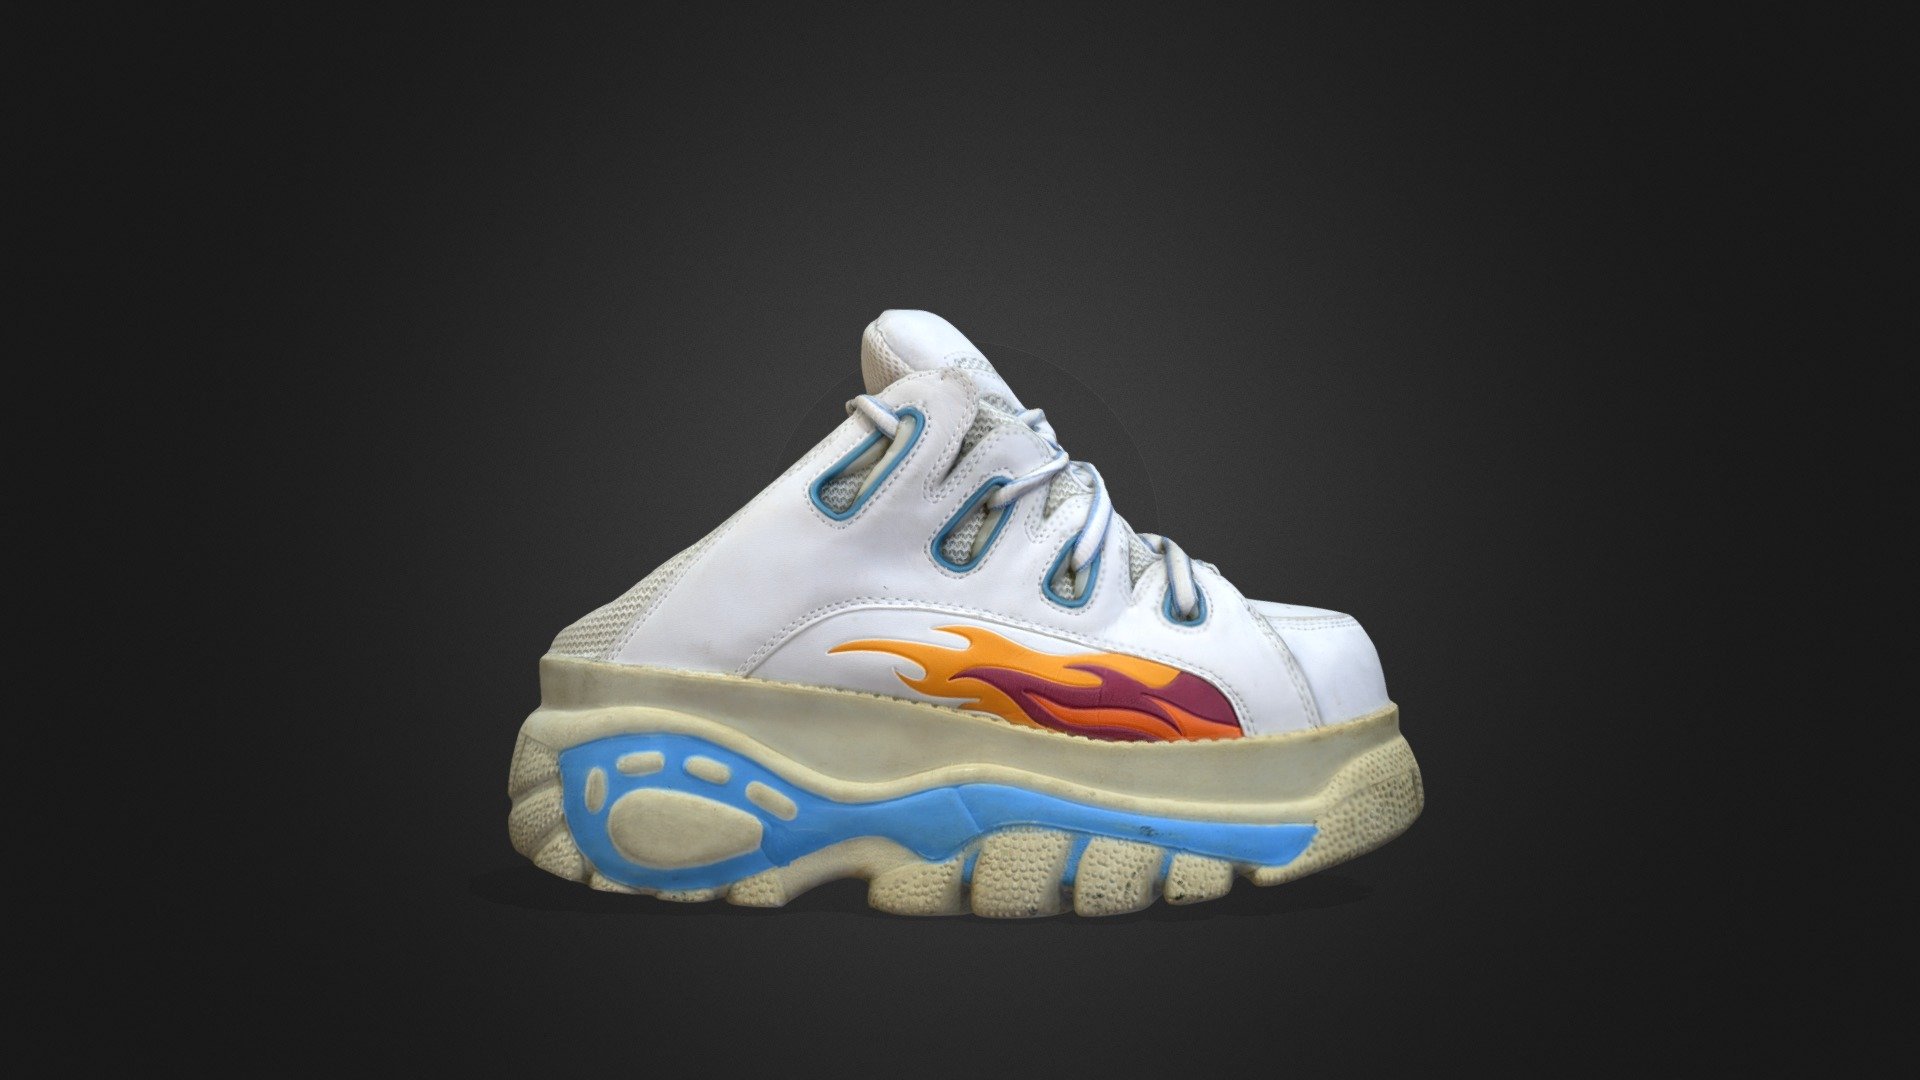 My 3D model generated with photogrammetry software 3DF Zephyr v4.523 processing 422 images - Osiris Platform Sneakers - White Flames - Buy Royalty Free 3D model by Sikozu 3d model